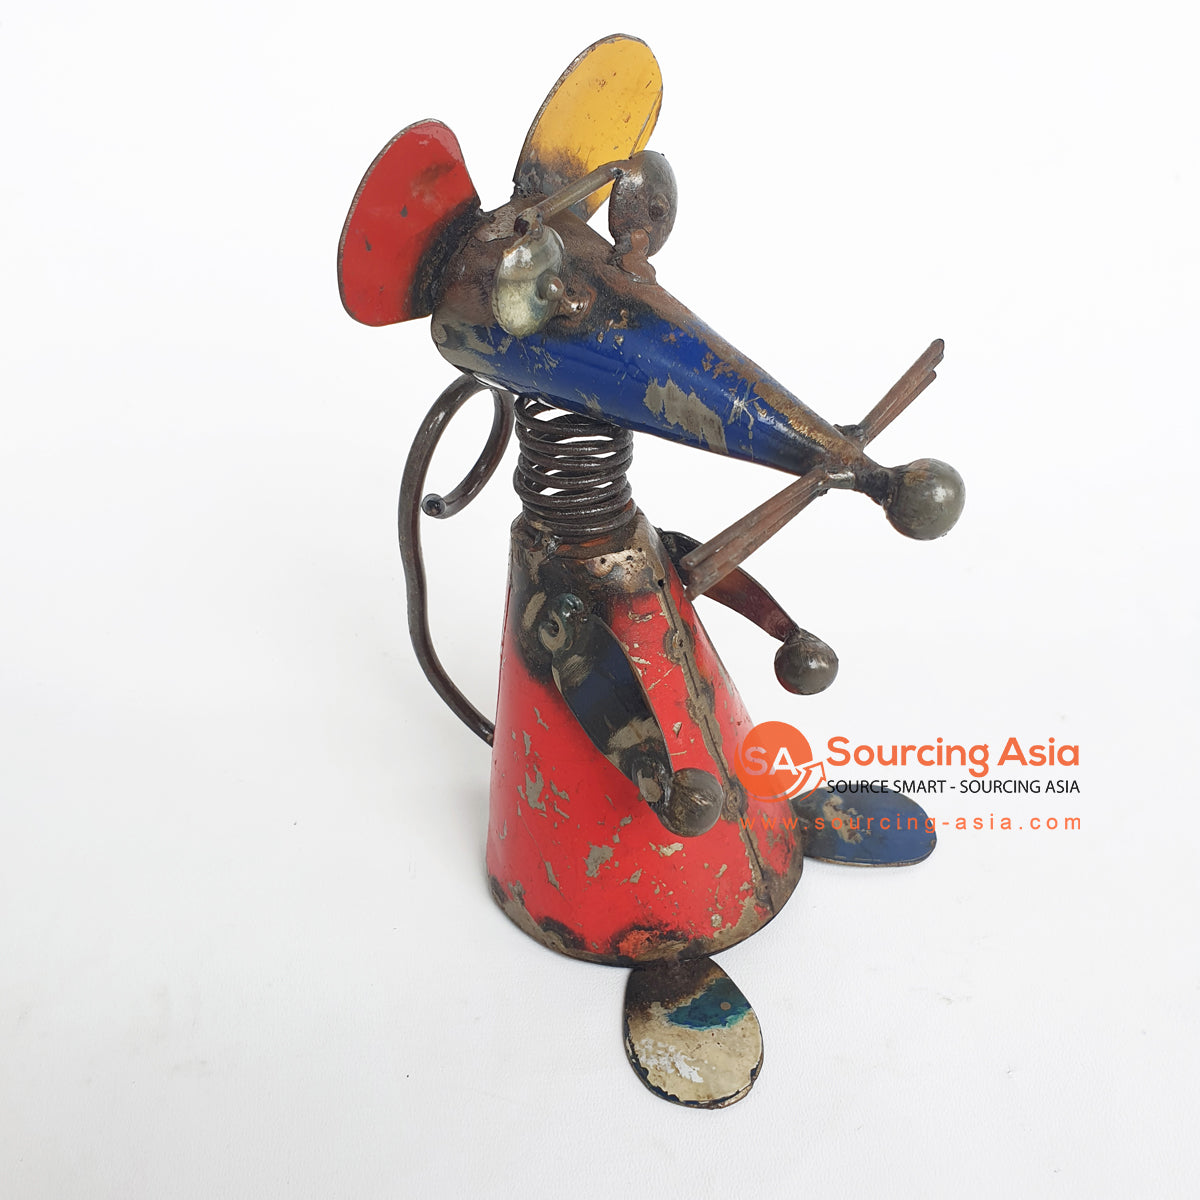 ALNC002 MULTICOLOR METAL MOUSE DECORATION WITH STICK